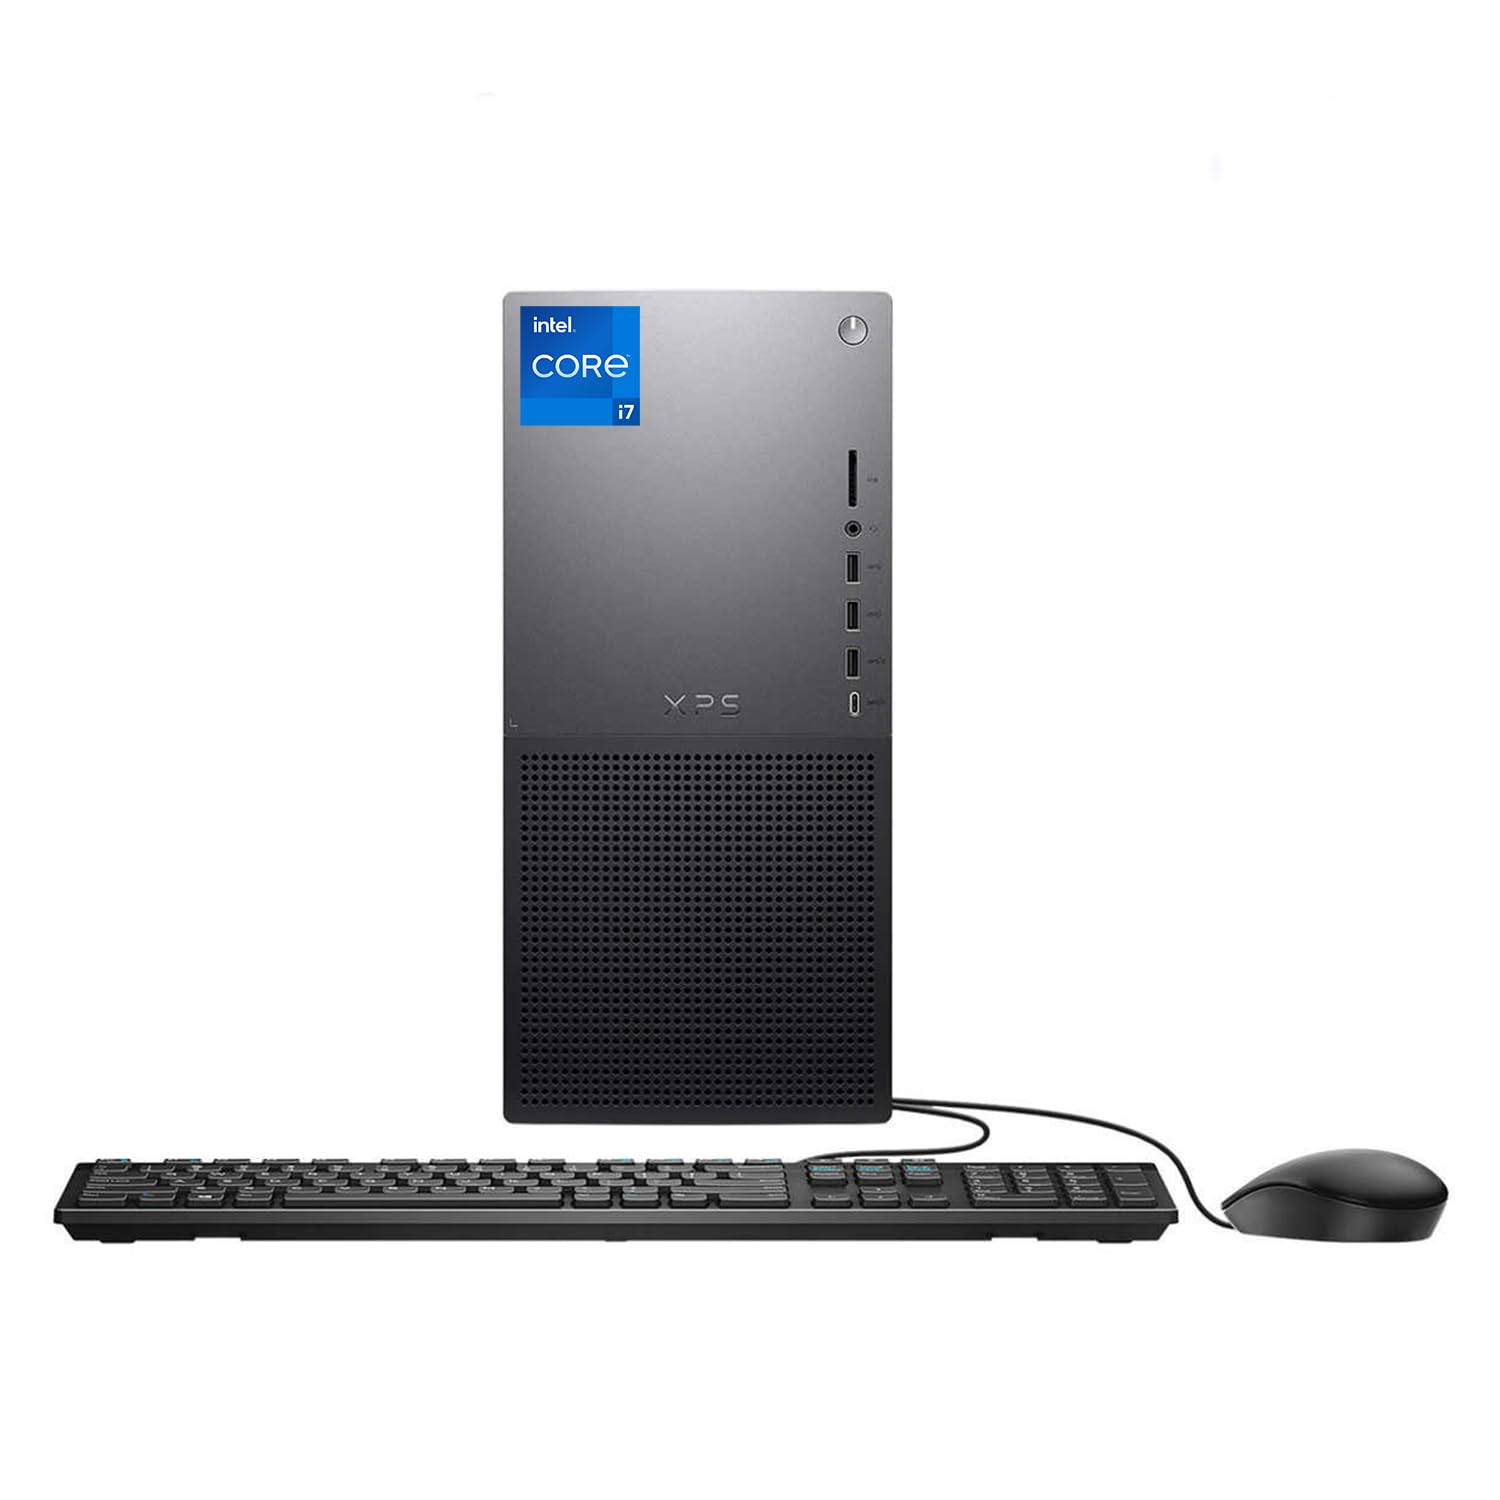 Dell Newest XPS 8960 Tower Desktop Computer, Intel Core i7-13700, 64GB DDR5 RAM, 2TB SSD, DisplayPort, Killer Wi-Fi 6, Wired Keyboard&Mouse, Windows 11 Home